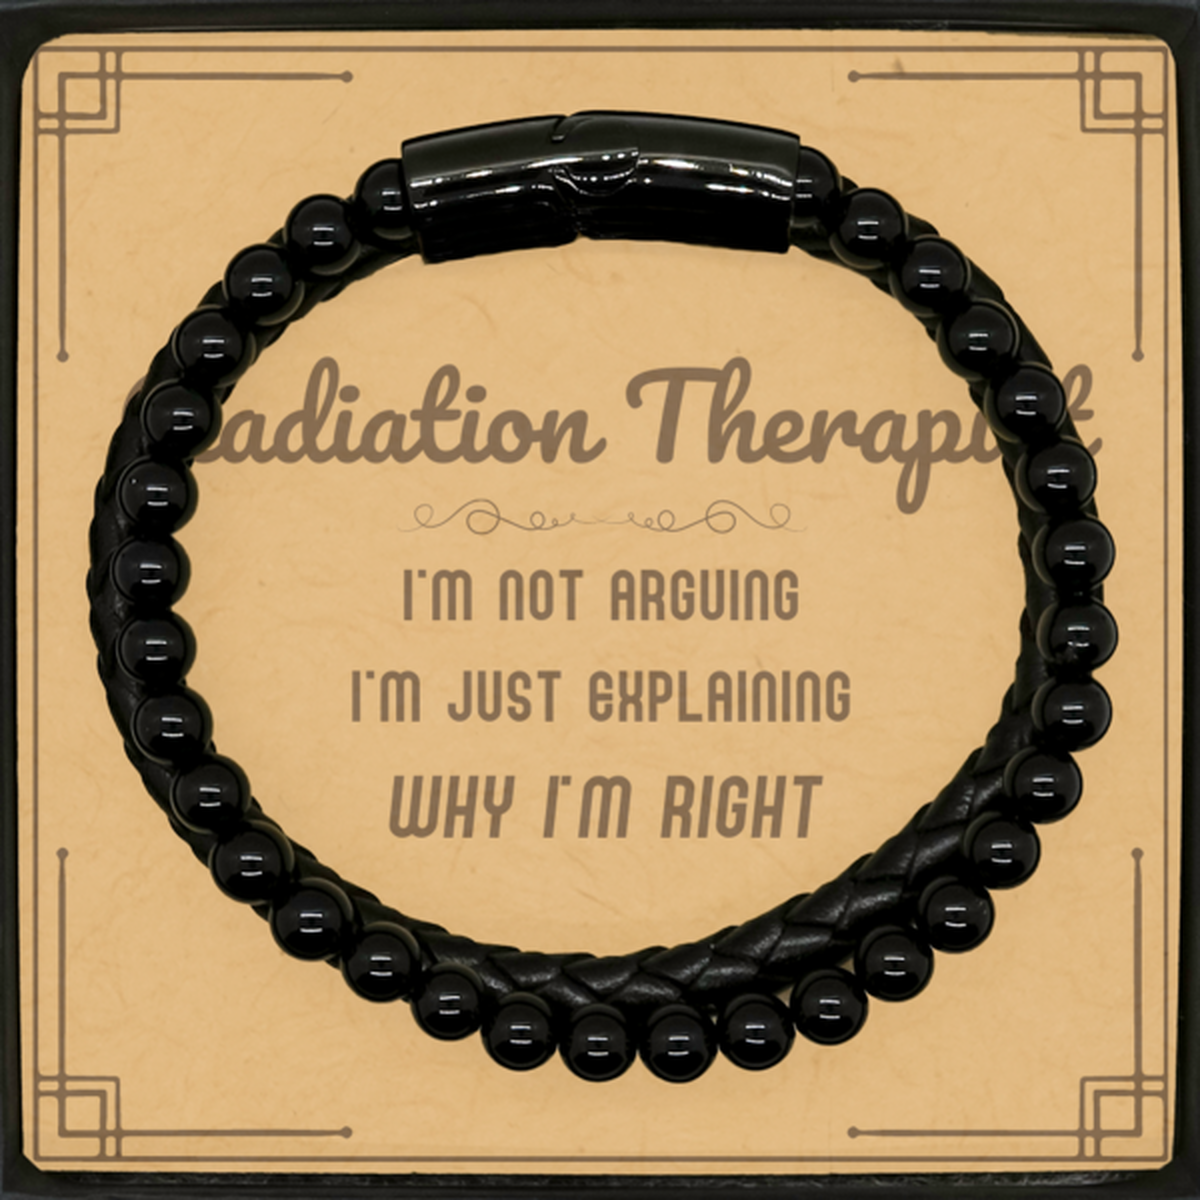 Radiation Therapist I'm not Arguing. I'm Just Explaining Why I'm RIGHT Stone Leather Bracelets, Funny Saying Quote Radiation Therapist Gifts For Radiation Therapist Message Card Graduation Birthday Christmas Gifts for Men Women Coworker